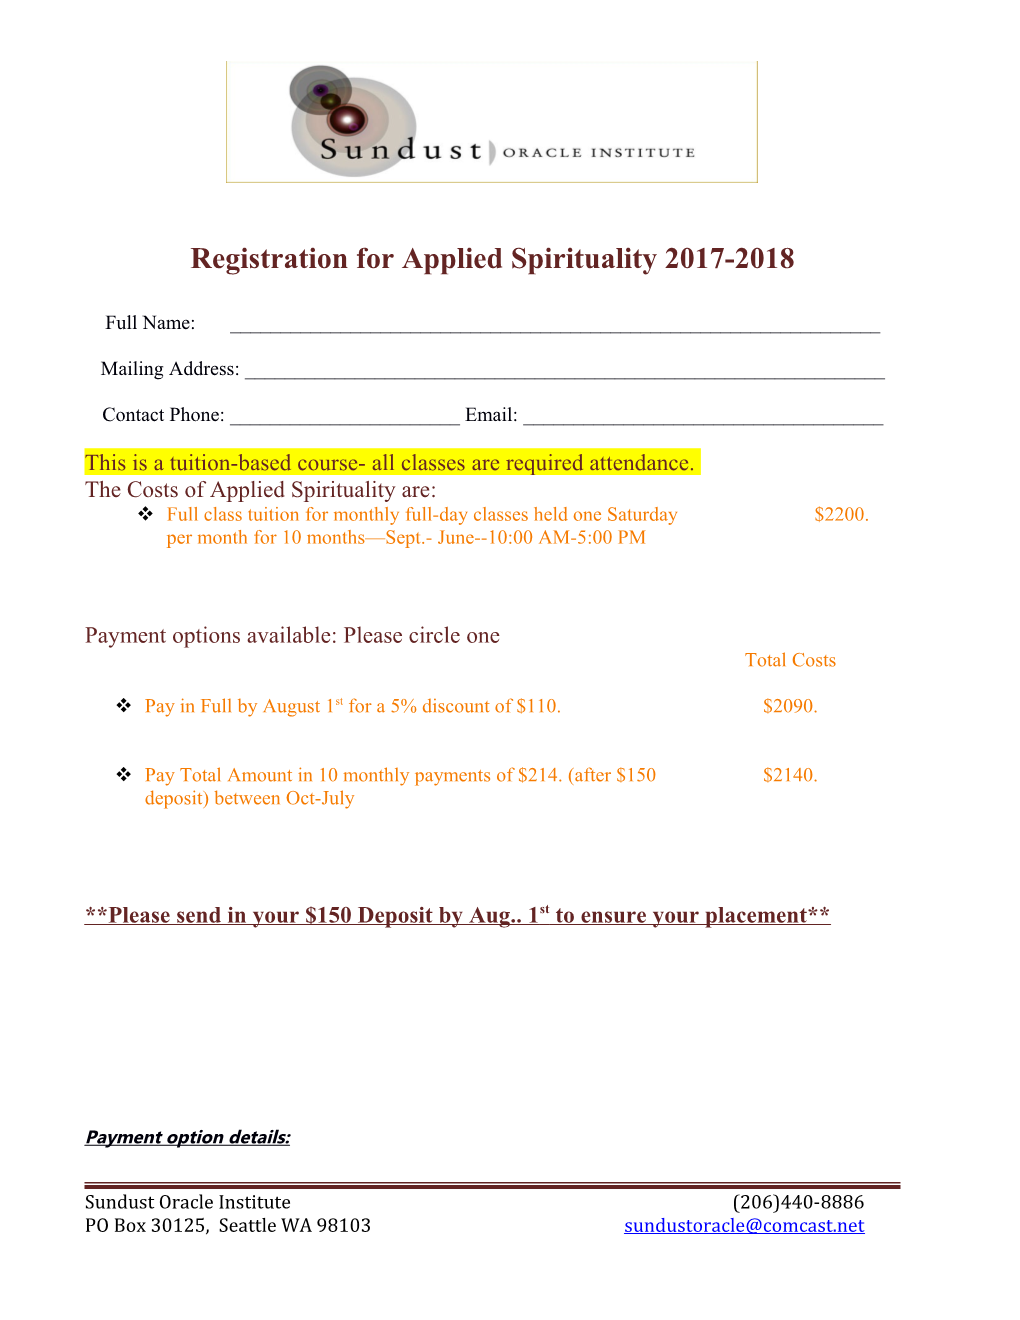 Registration for Applied Spirituality 2017-2018